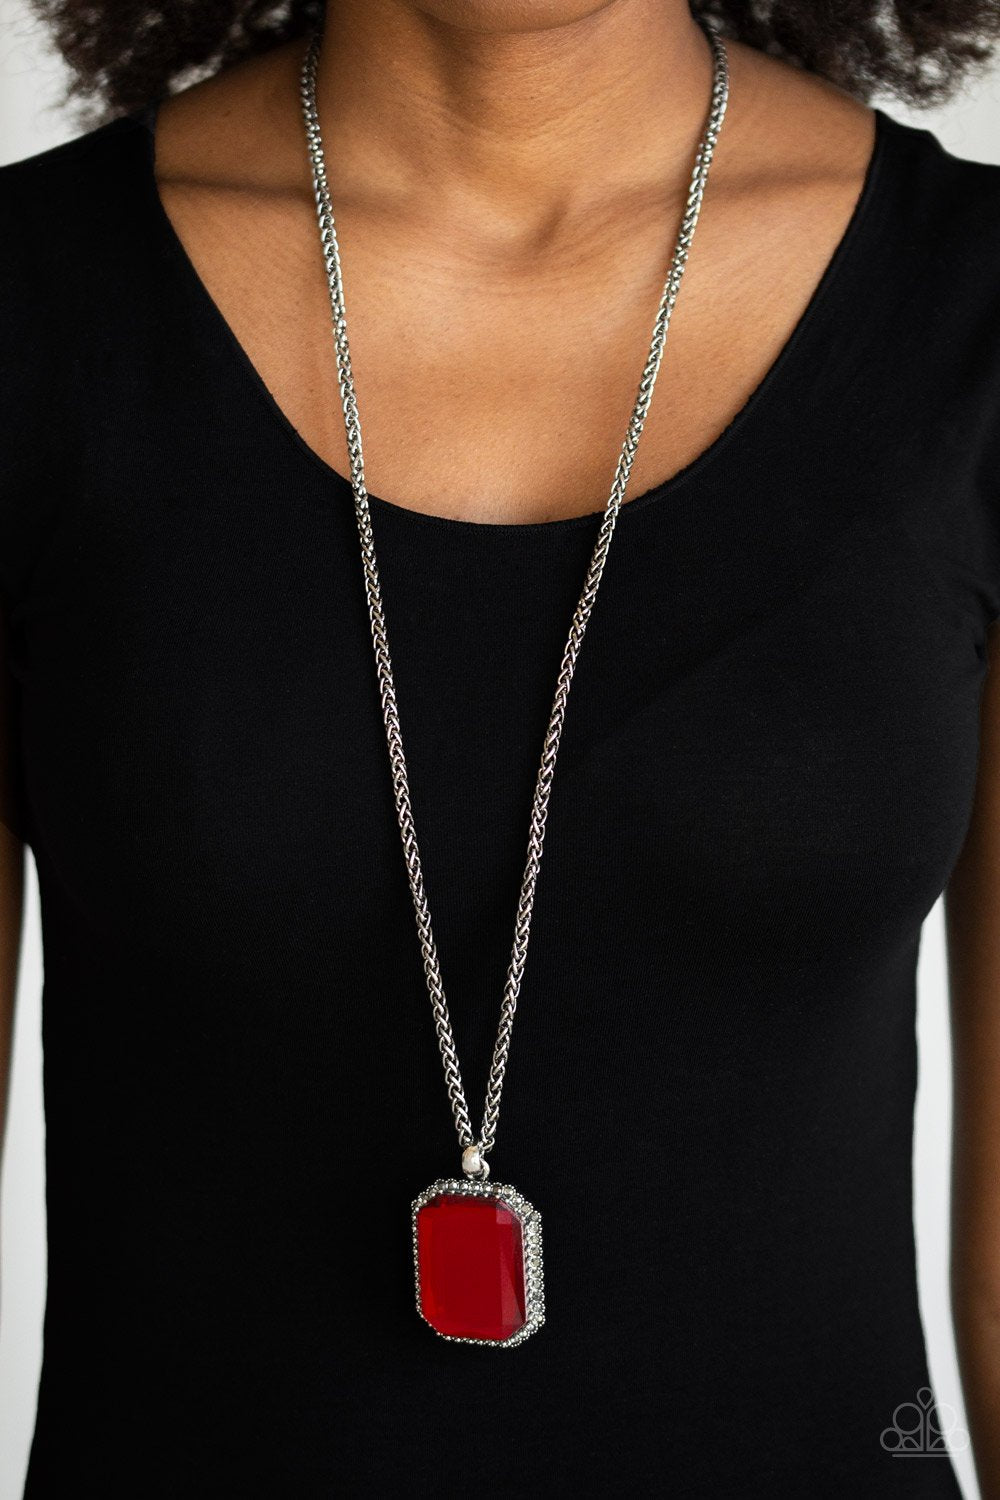 Let Your HEIR Down-red-Paparazzi necklace